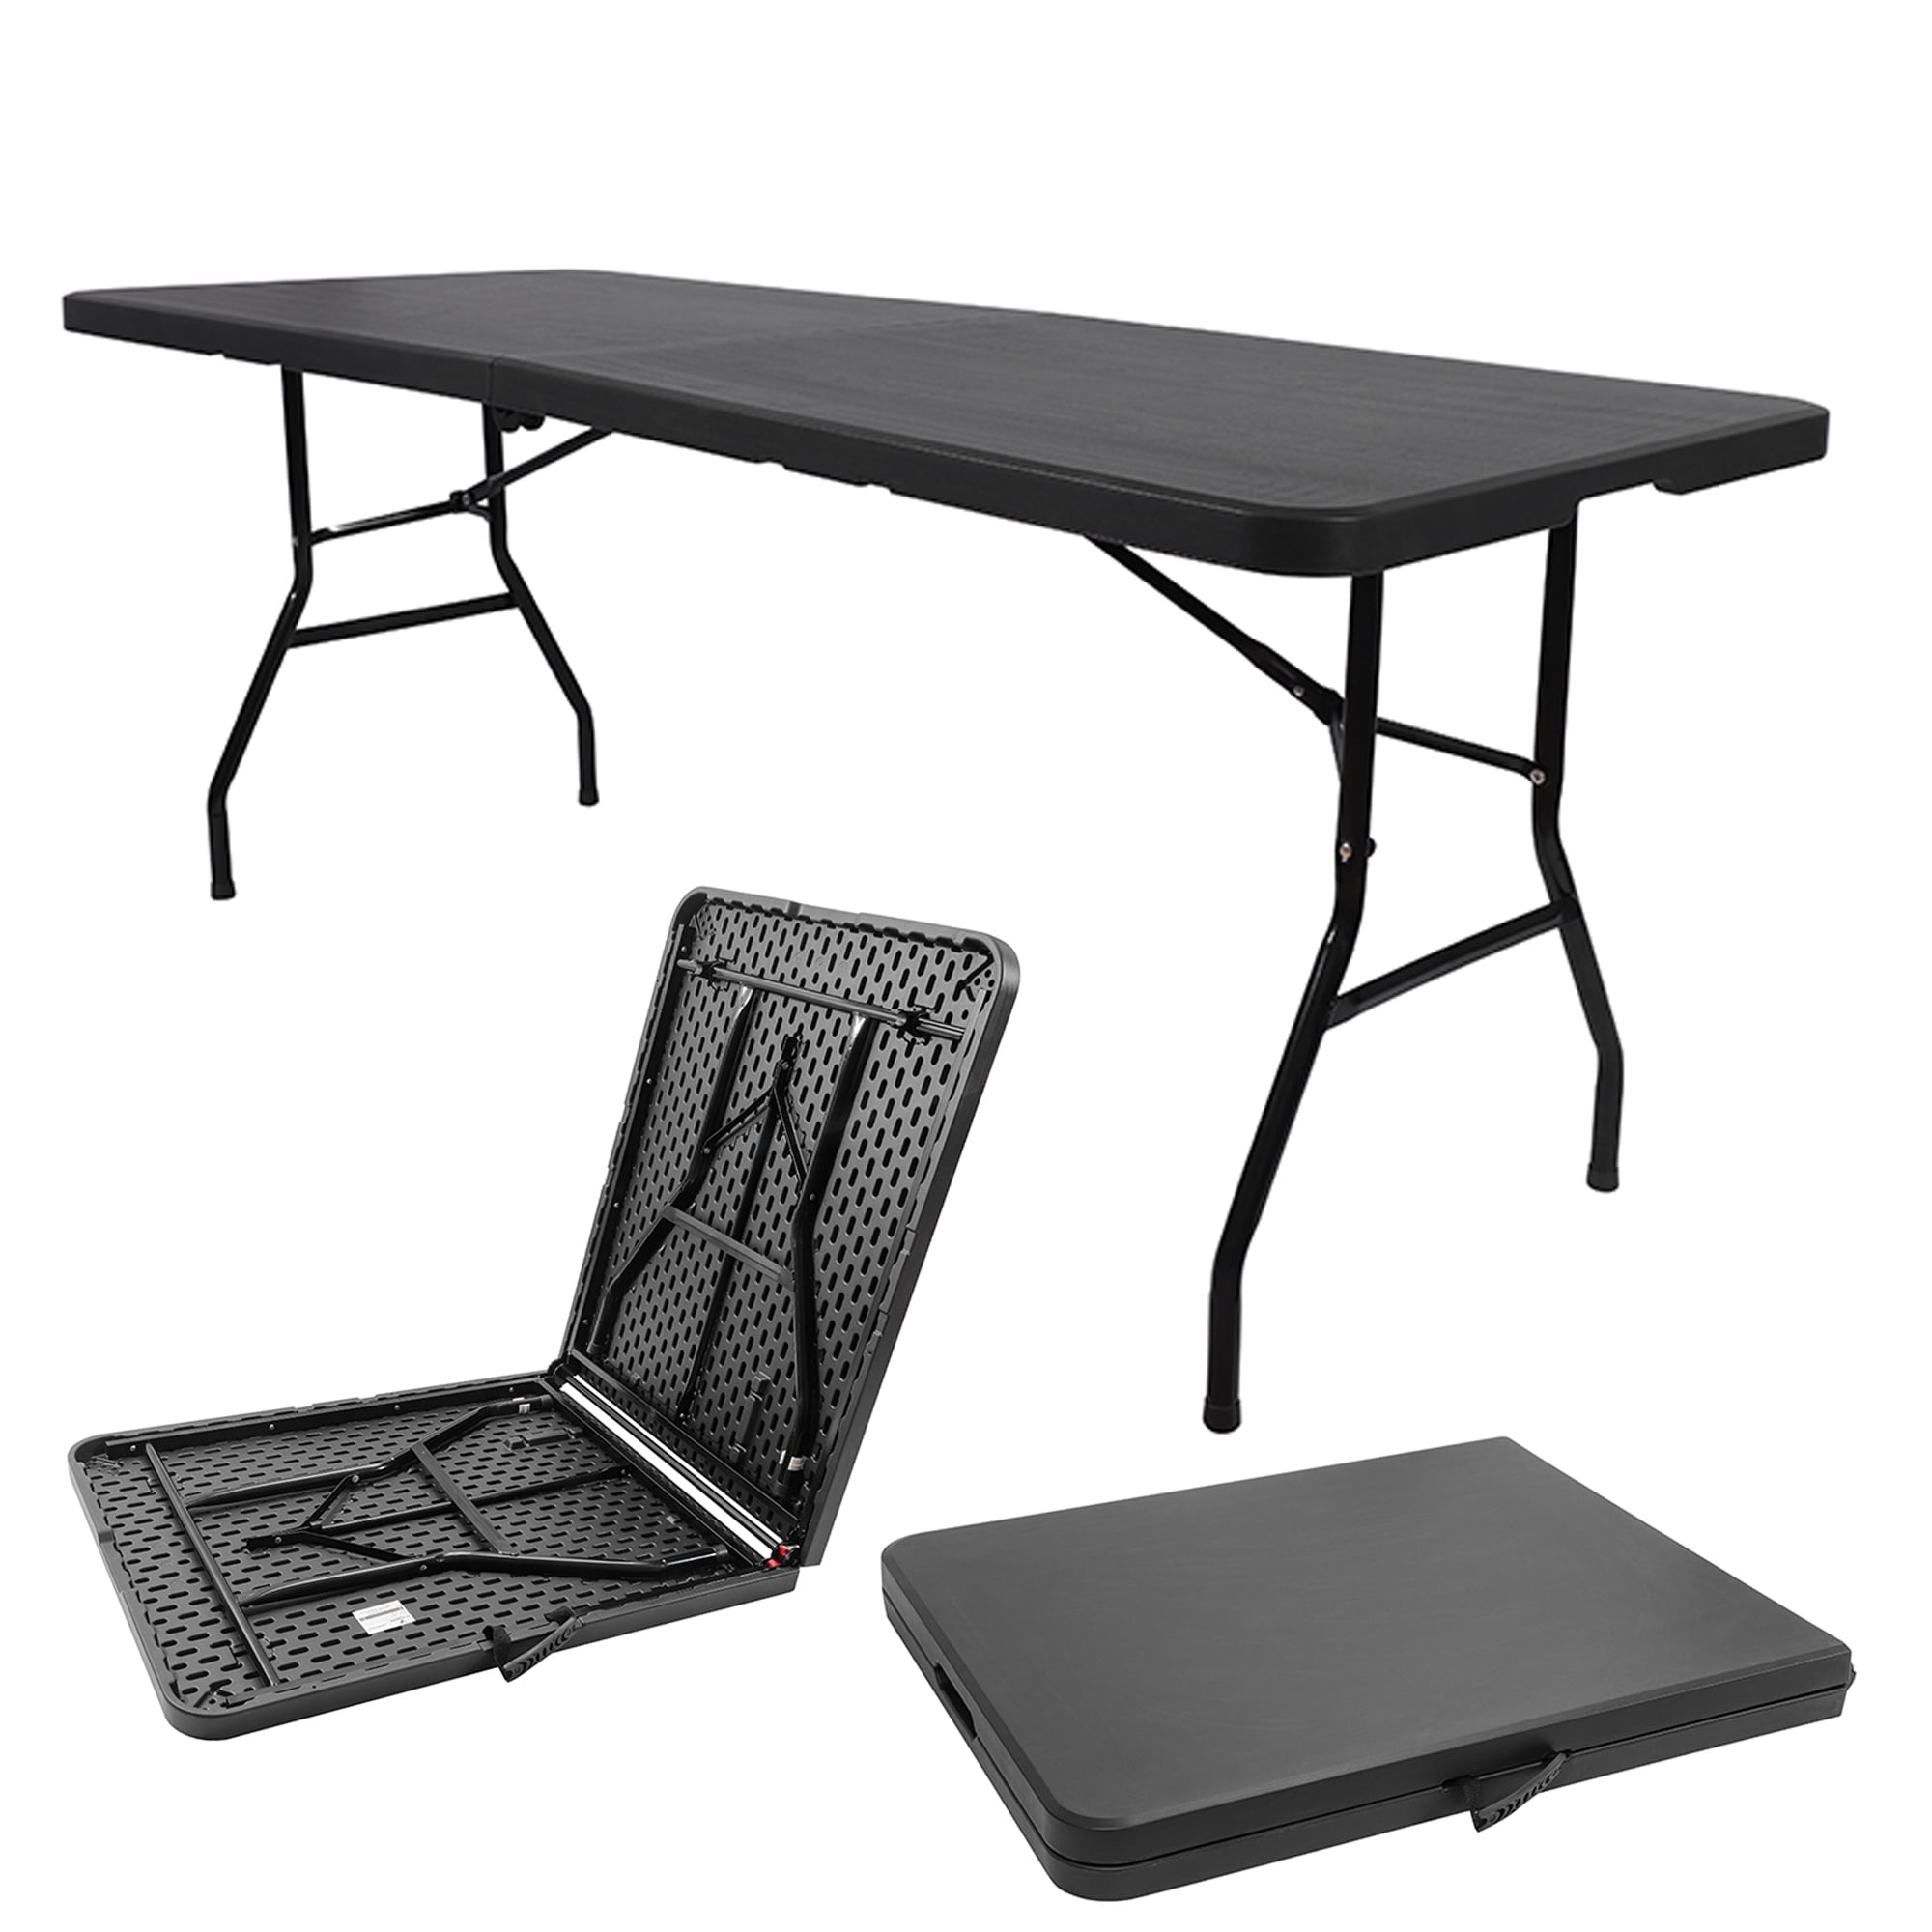 SUGIFT Folding Table 6ft Portable Heavy Duty Plastic Foldable Table for  Indoor Outdoor Use (Black)